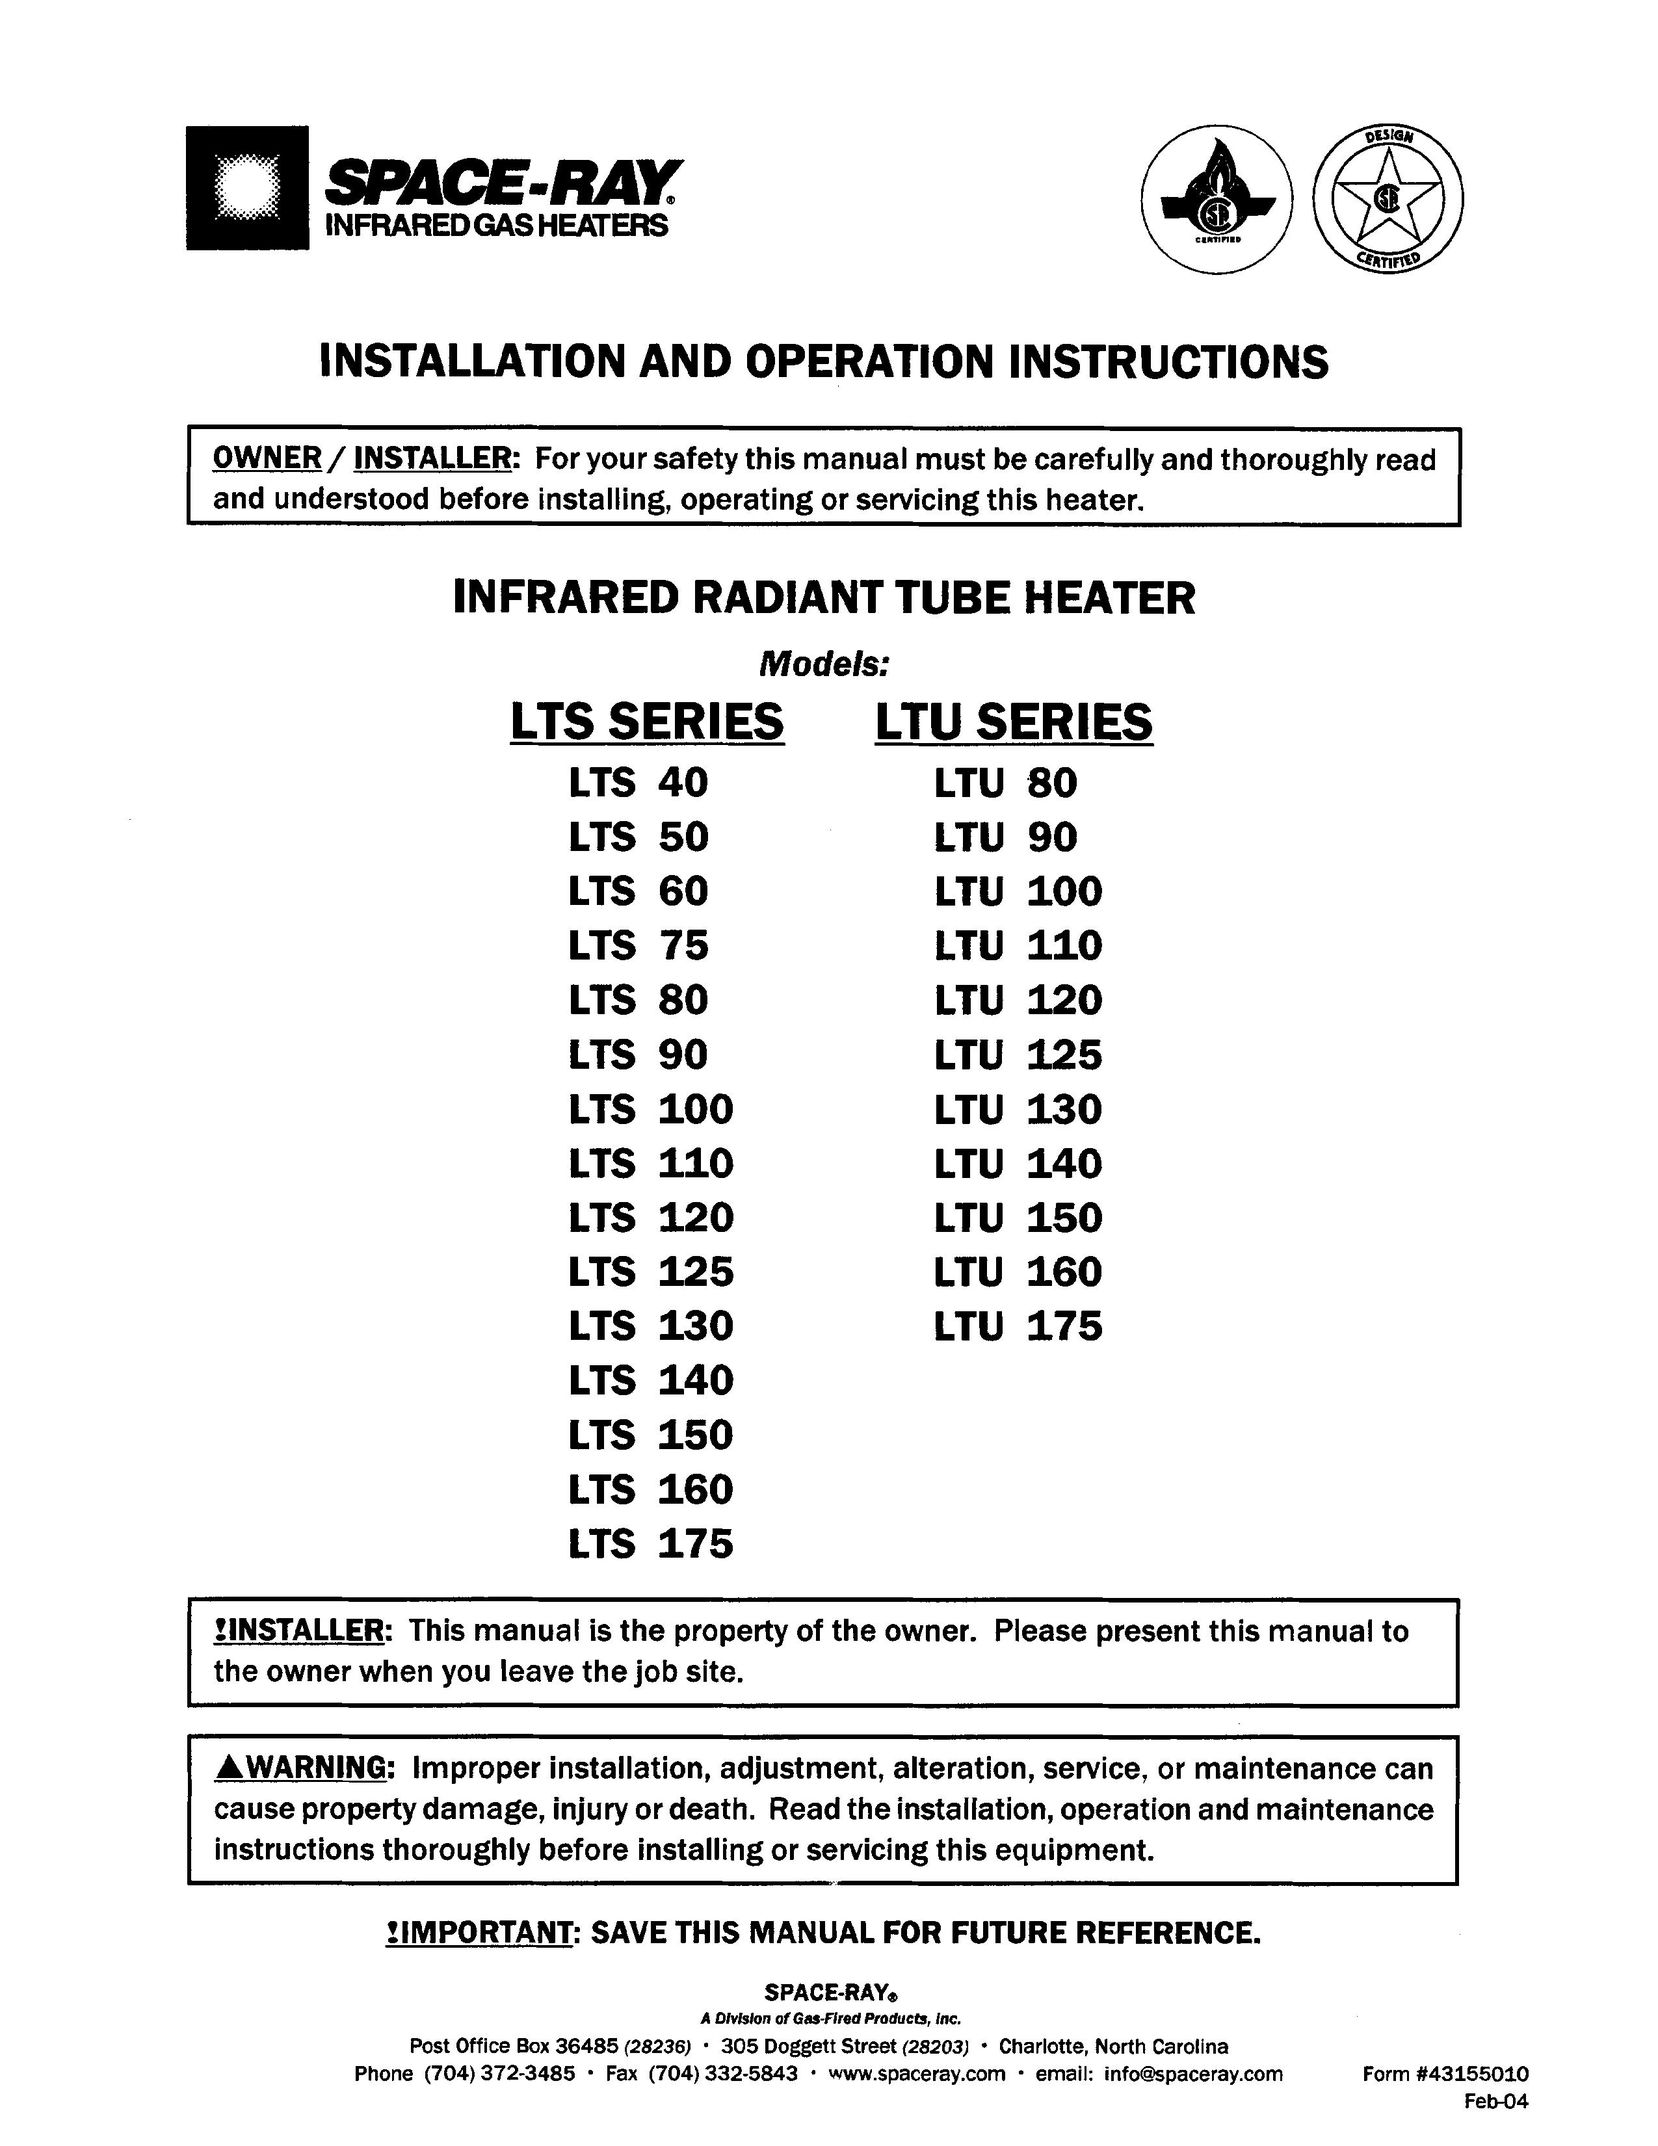 Gas-Fired Products LTU 175 Electric Heater User Manual